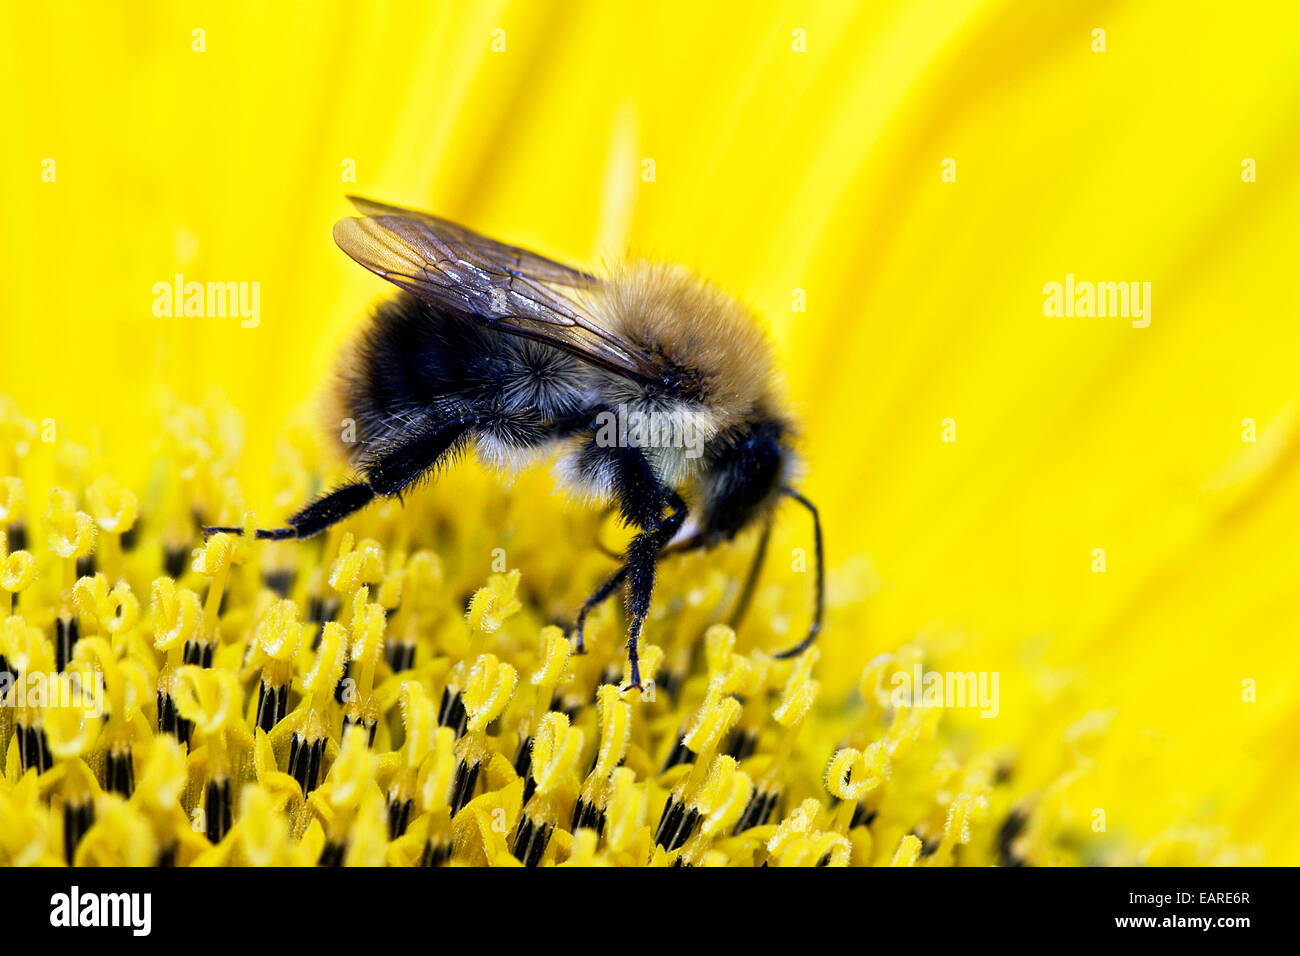 Bumblebee (Bombus sp.) collecting nectar and pollen on a sunflower, Berlin, Berlin, Germany Stock Photo